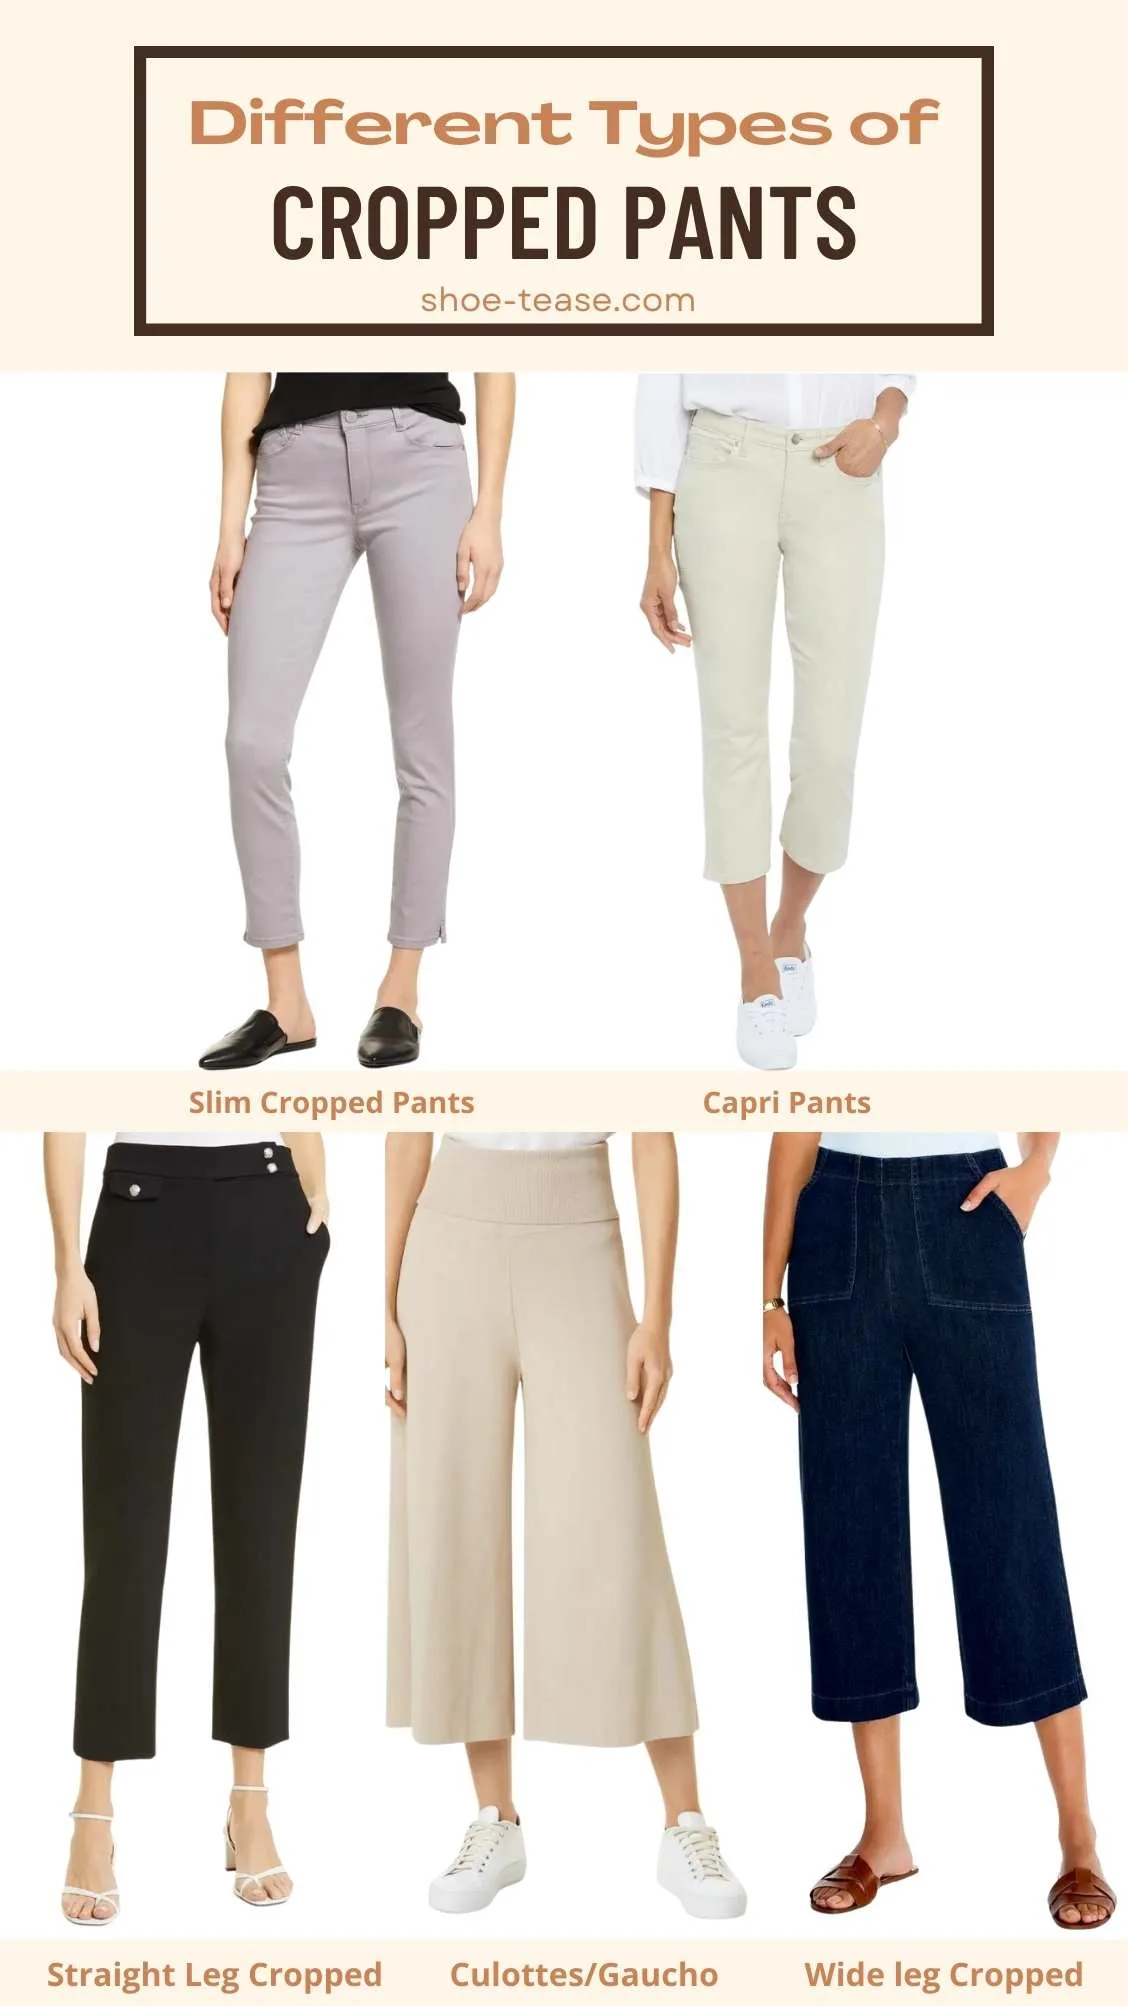 Types of Women's Pants: 19 Unique Types You Need to Own - Africana Fashion